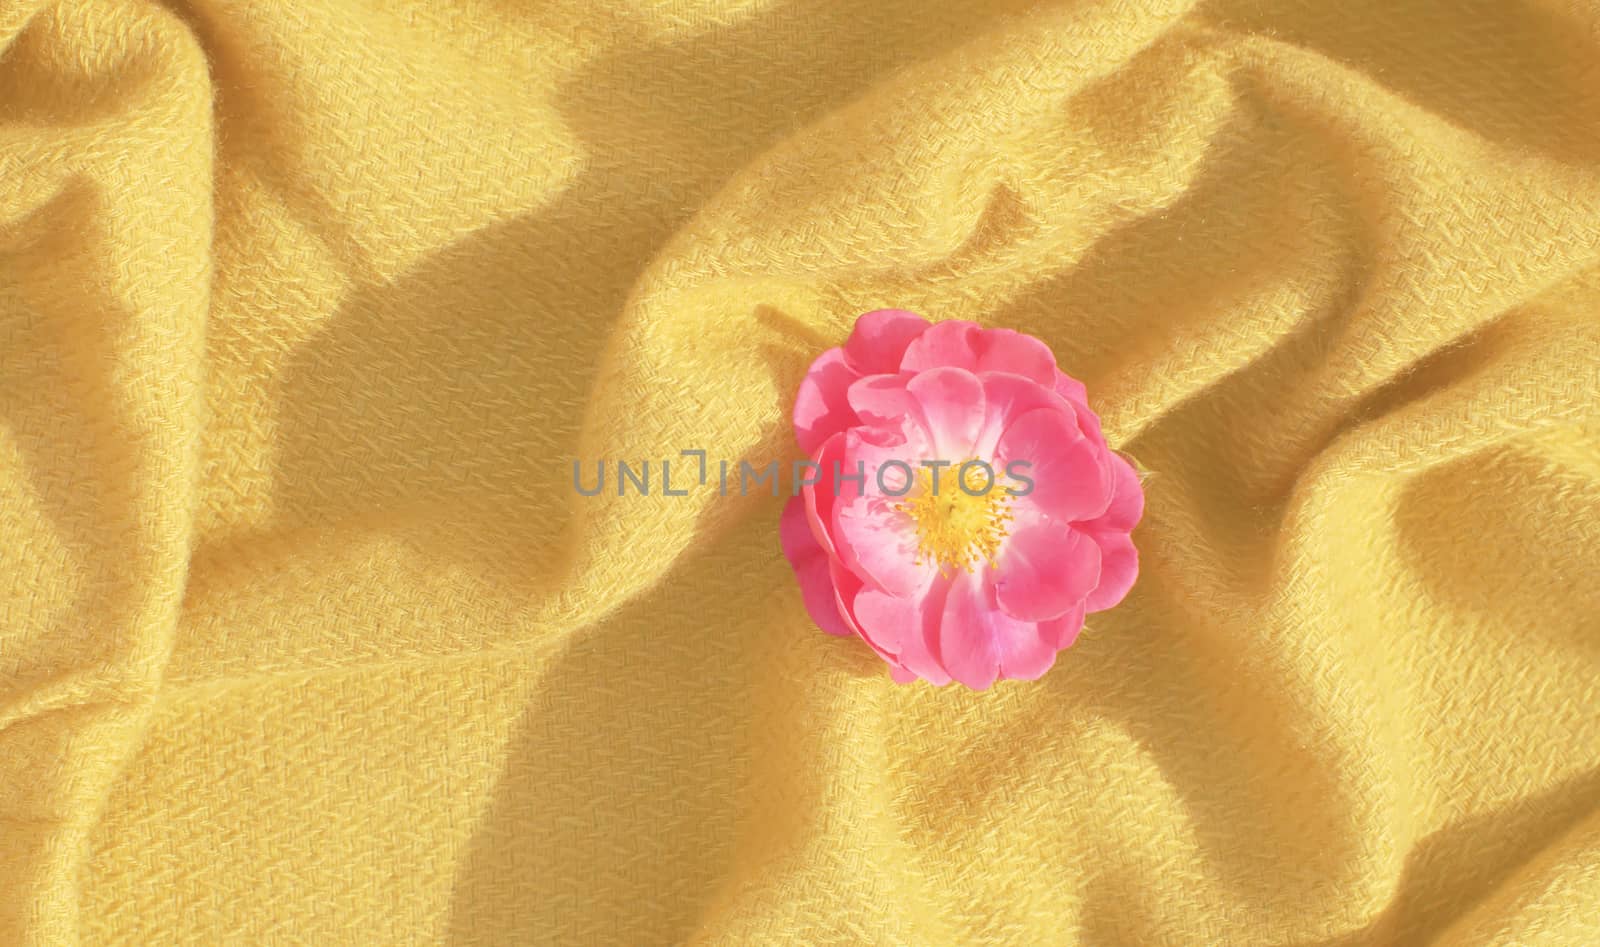 Rosehip flower on yellow fabric by Alize